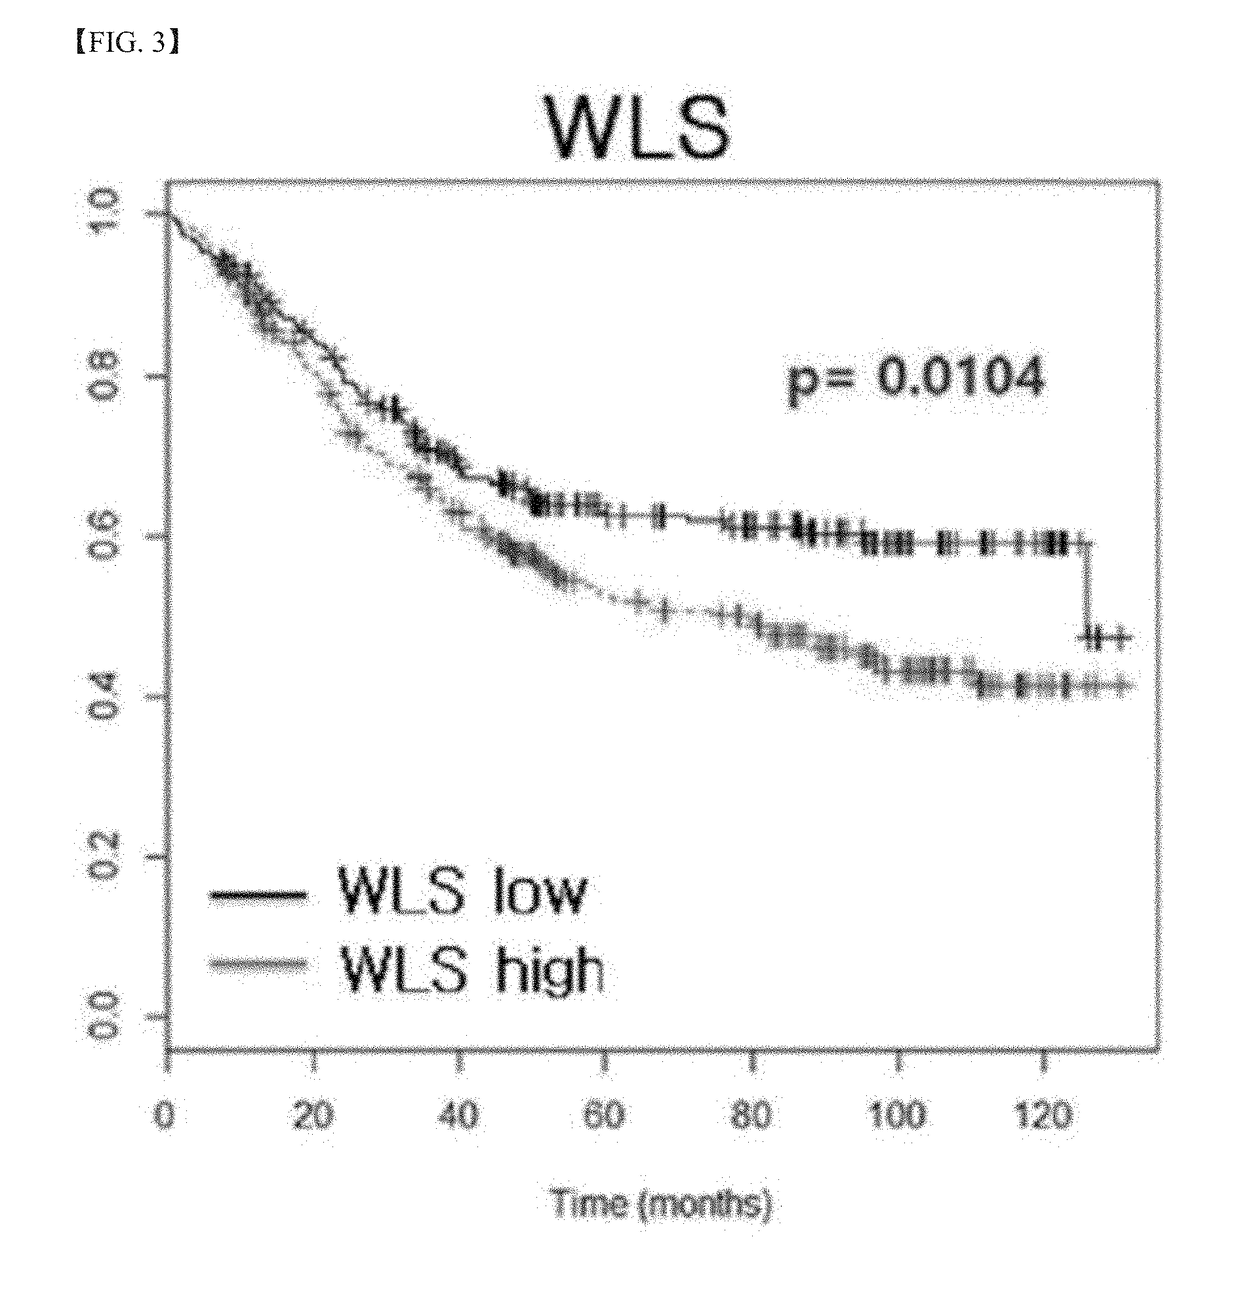 Antibody for Recognizing Specific Motif of WLS Protein, and Pharmaceutical Composition Comprising Same